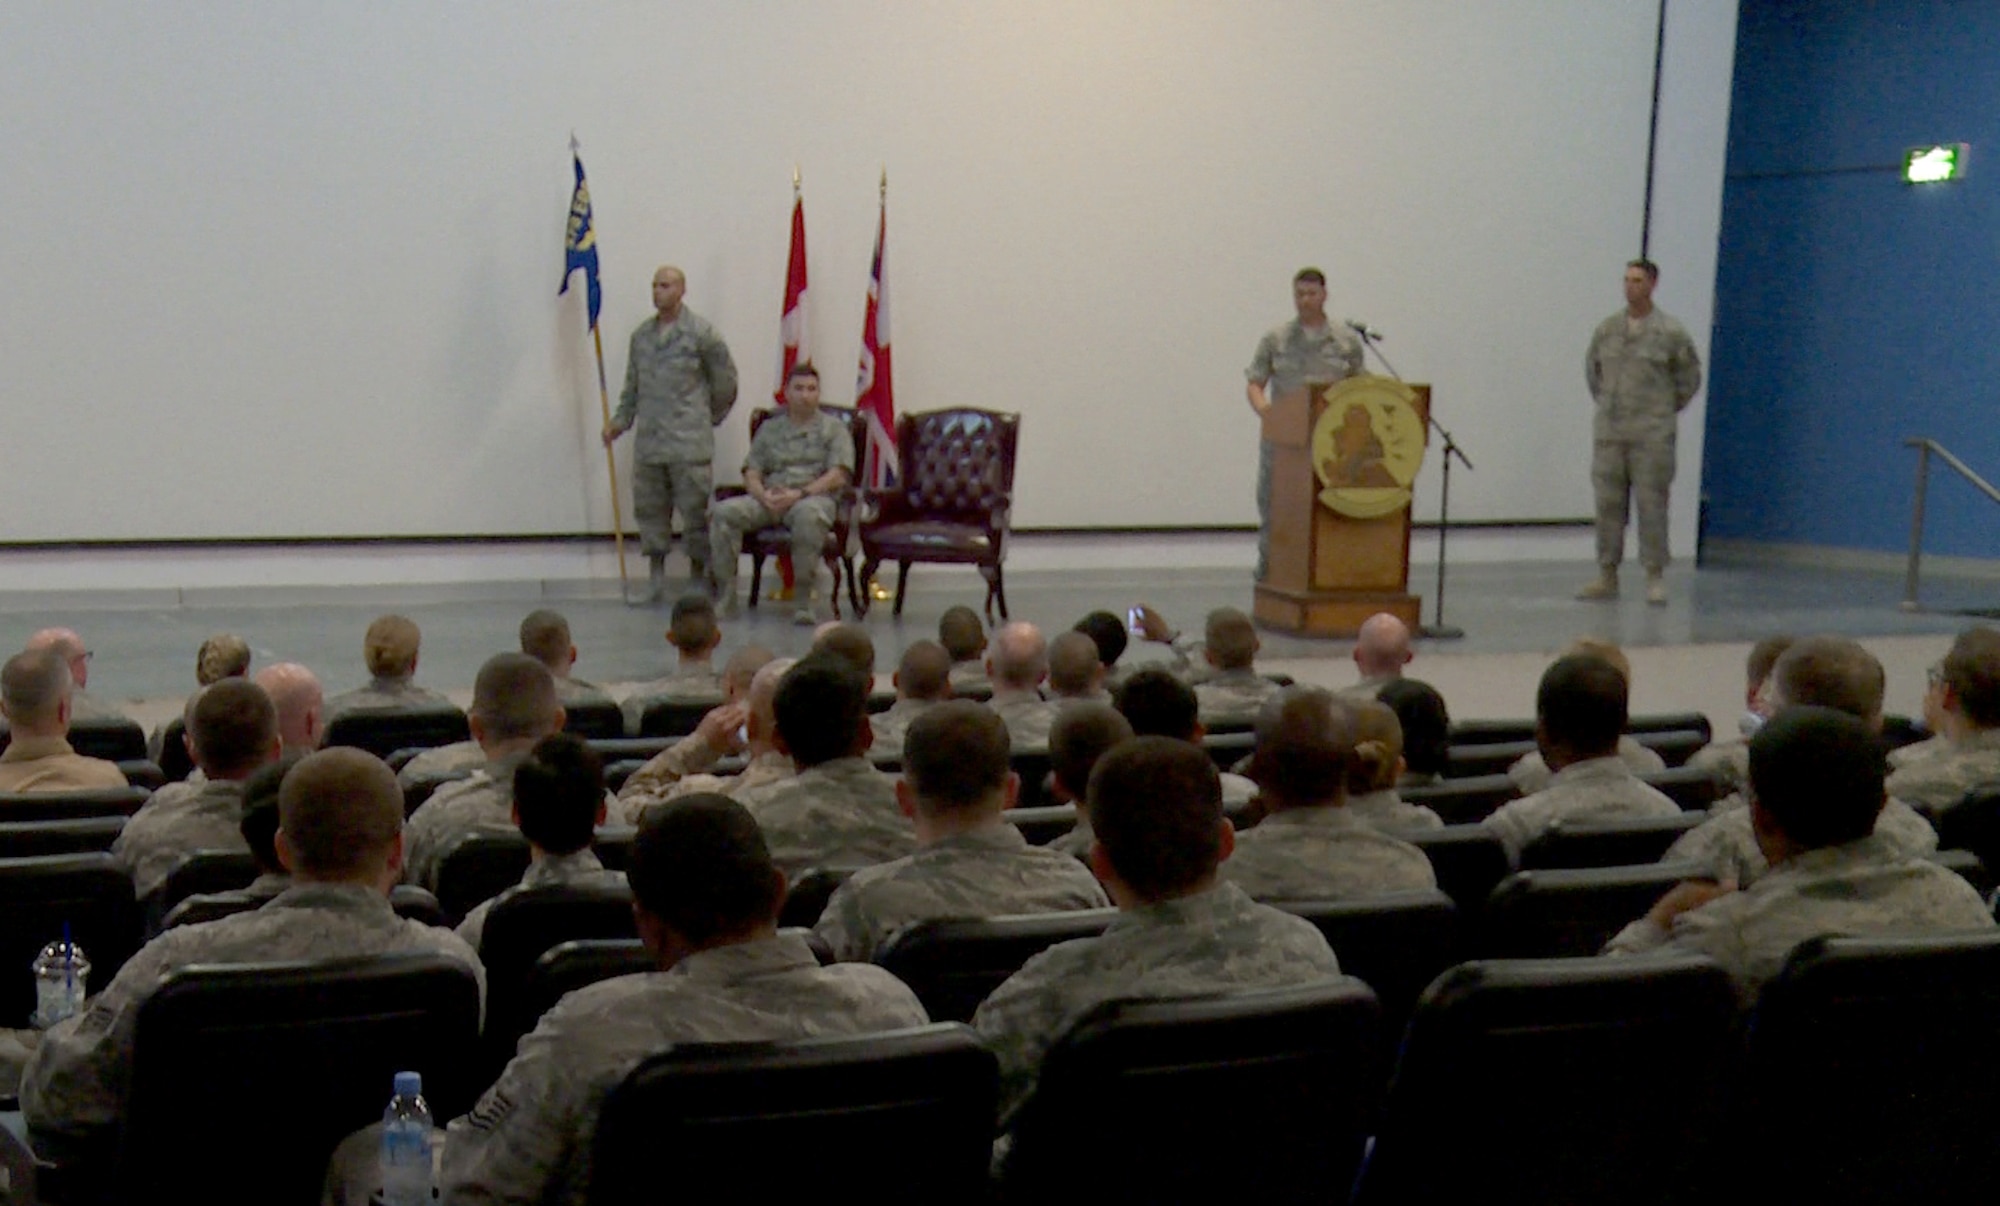 U.S. Air Force Lt. Col. Stuart Williamson, 71st Expeditionary Air Control Squadron commander, speaks during an inactivation ceremony for the 71st EACS Nov. 1, 2014, at Al Udeid Air Base, Qatar. The 71st EACS’s mission was transferred to the 727th EACS.